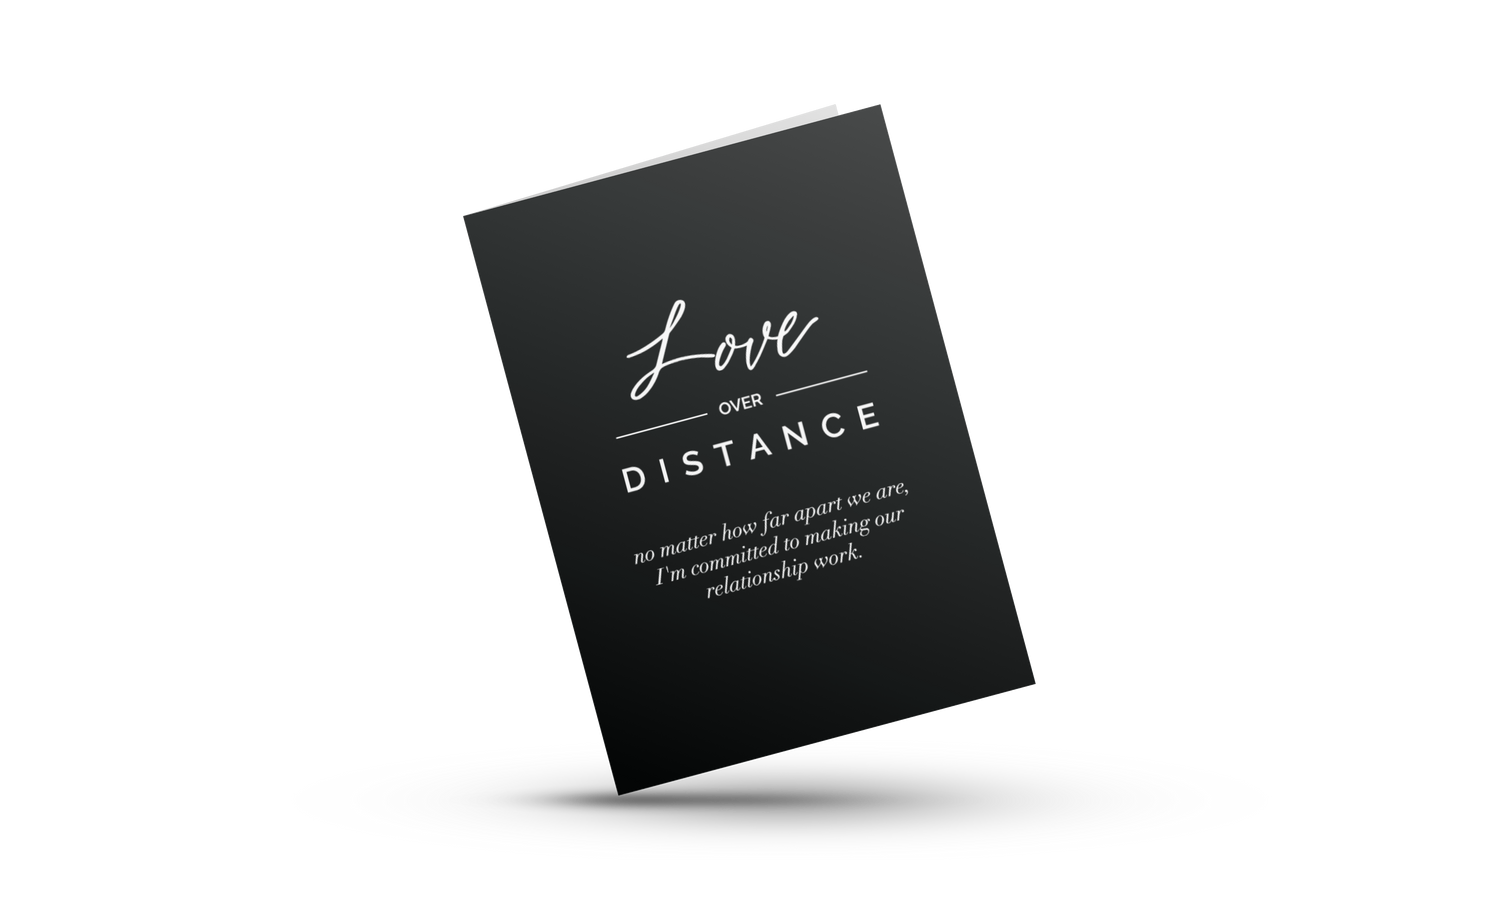 White and Black Greeting Card with gray envelope. Minimalist greeting card for lovers and couples. Greeting Card for Long Distance Relationships.